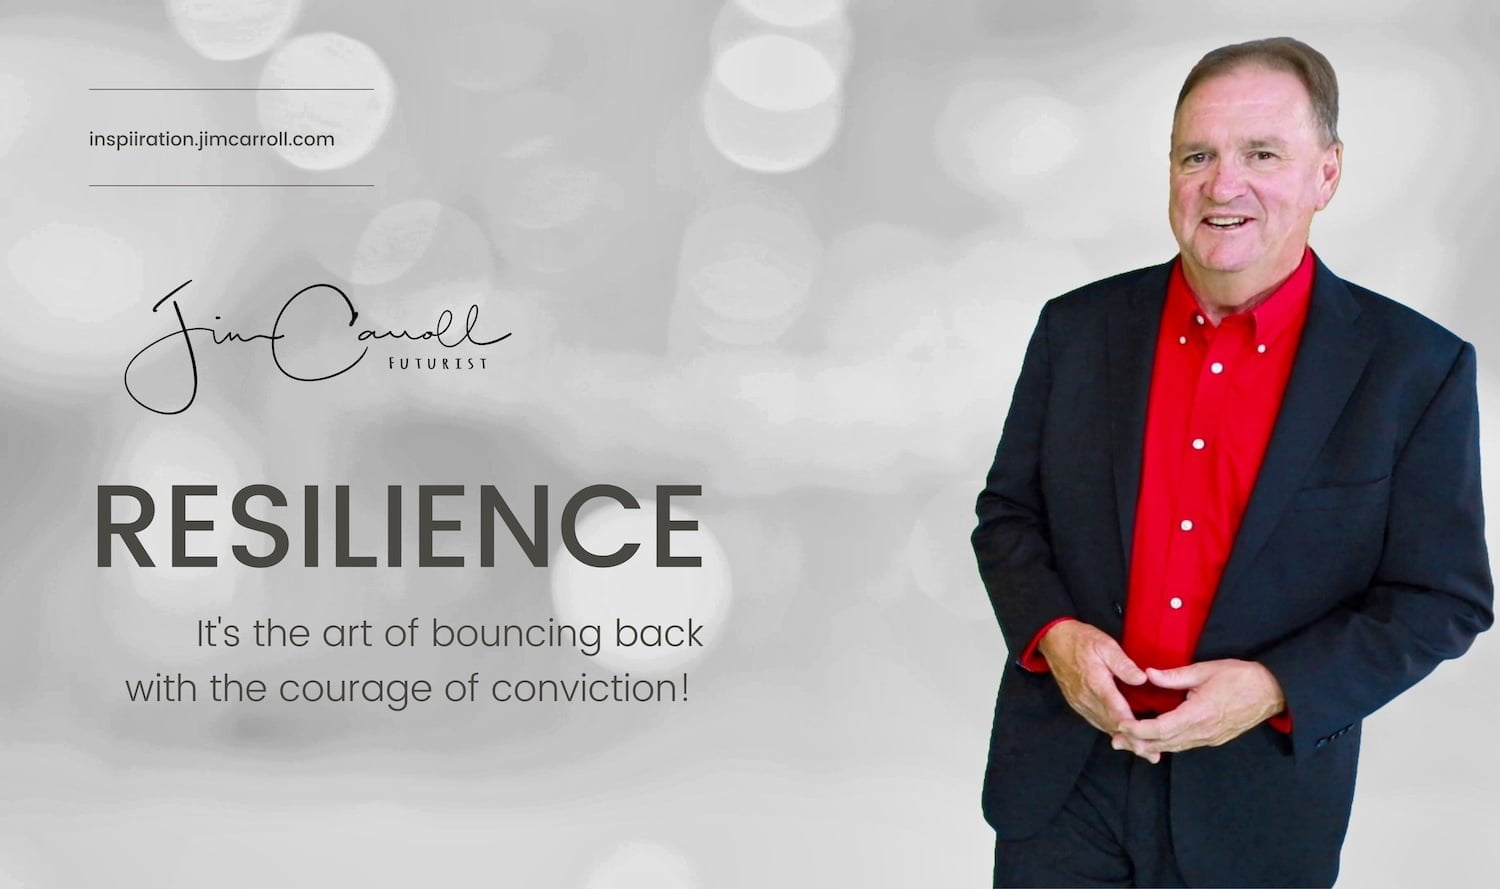 Daily Inspiration: "Resilience: It's the art of bouncing back with the courage of conviction! "